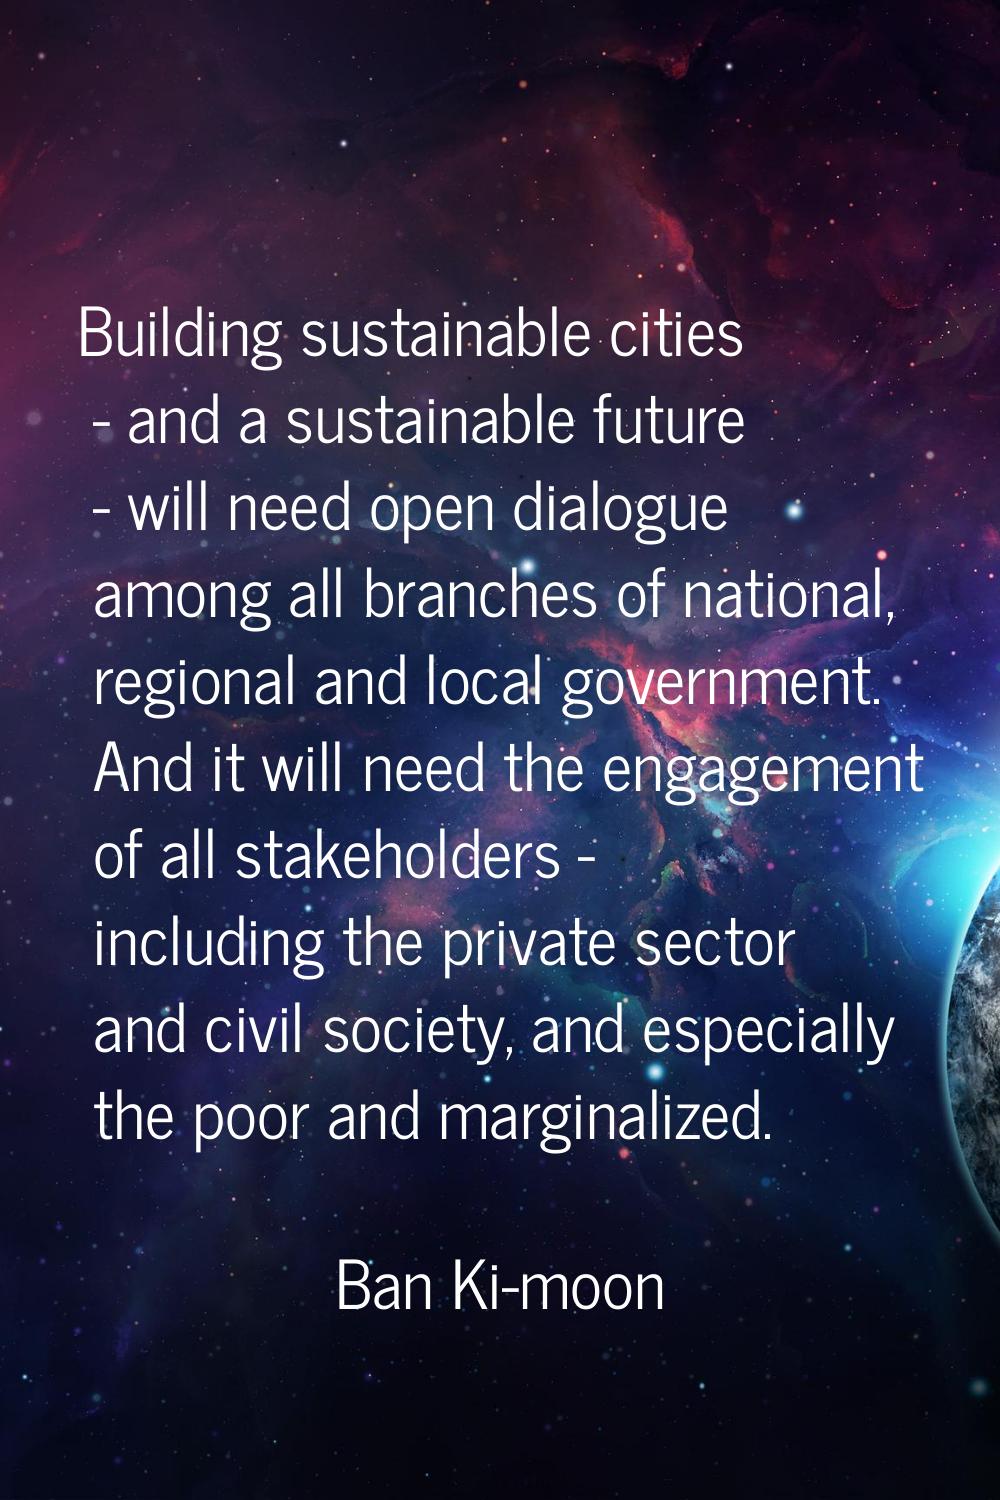 Building sustainable cities - and a sustainable future - will need open dialogue among all branches